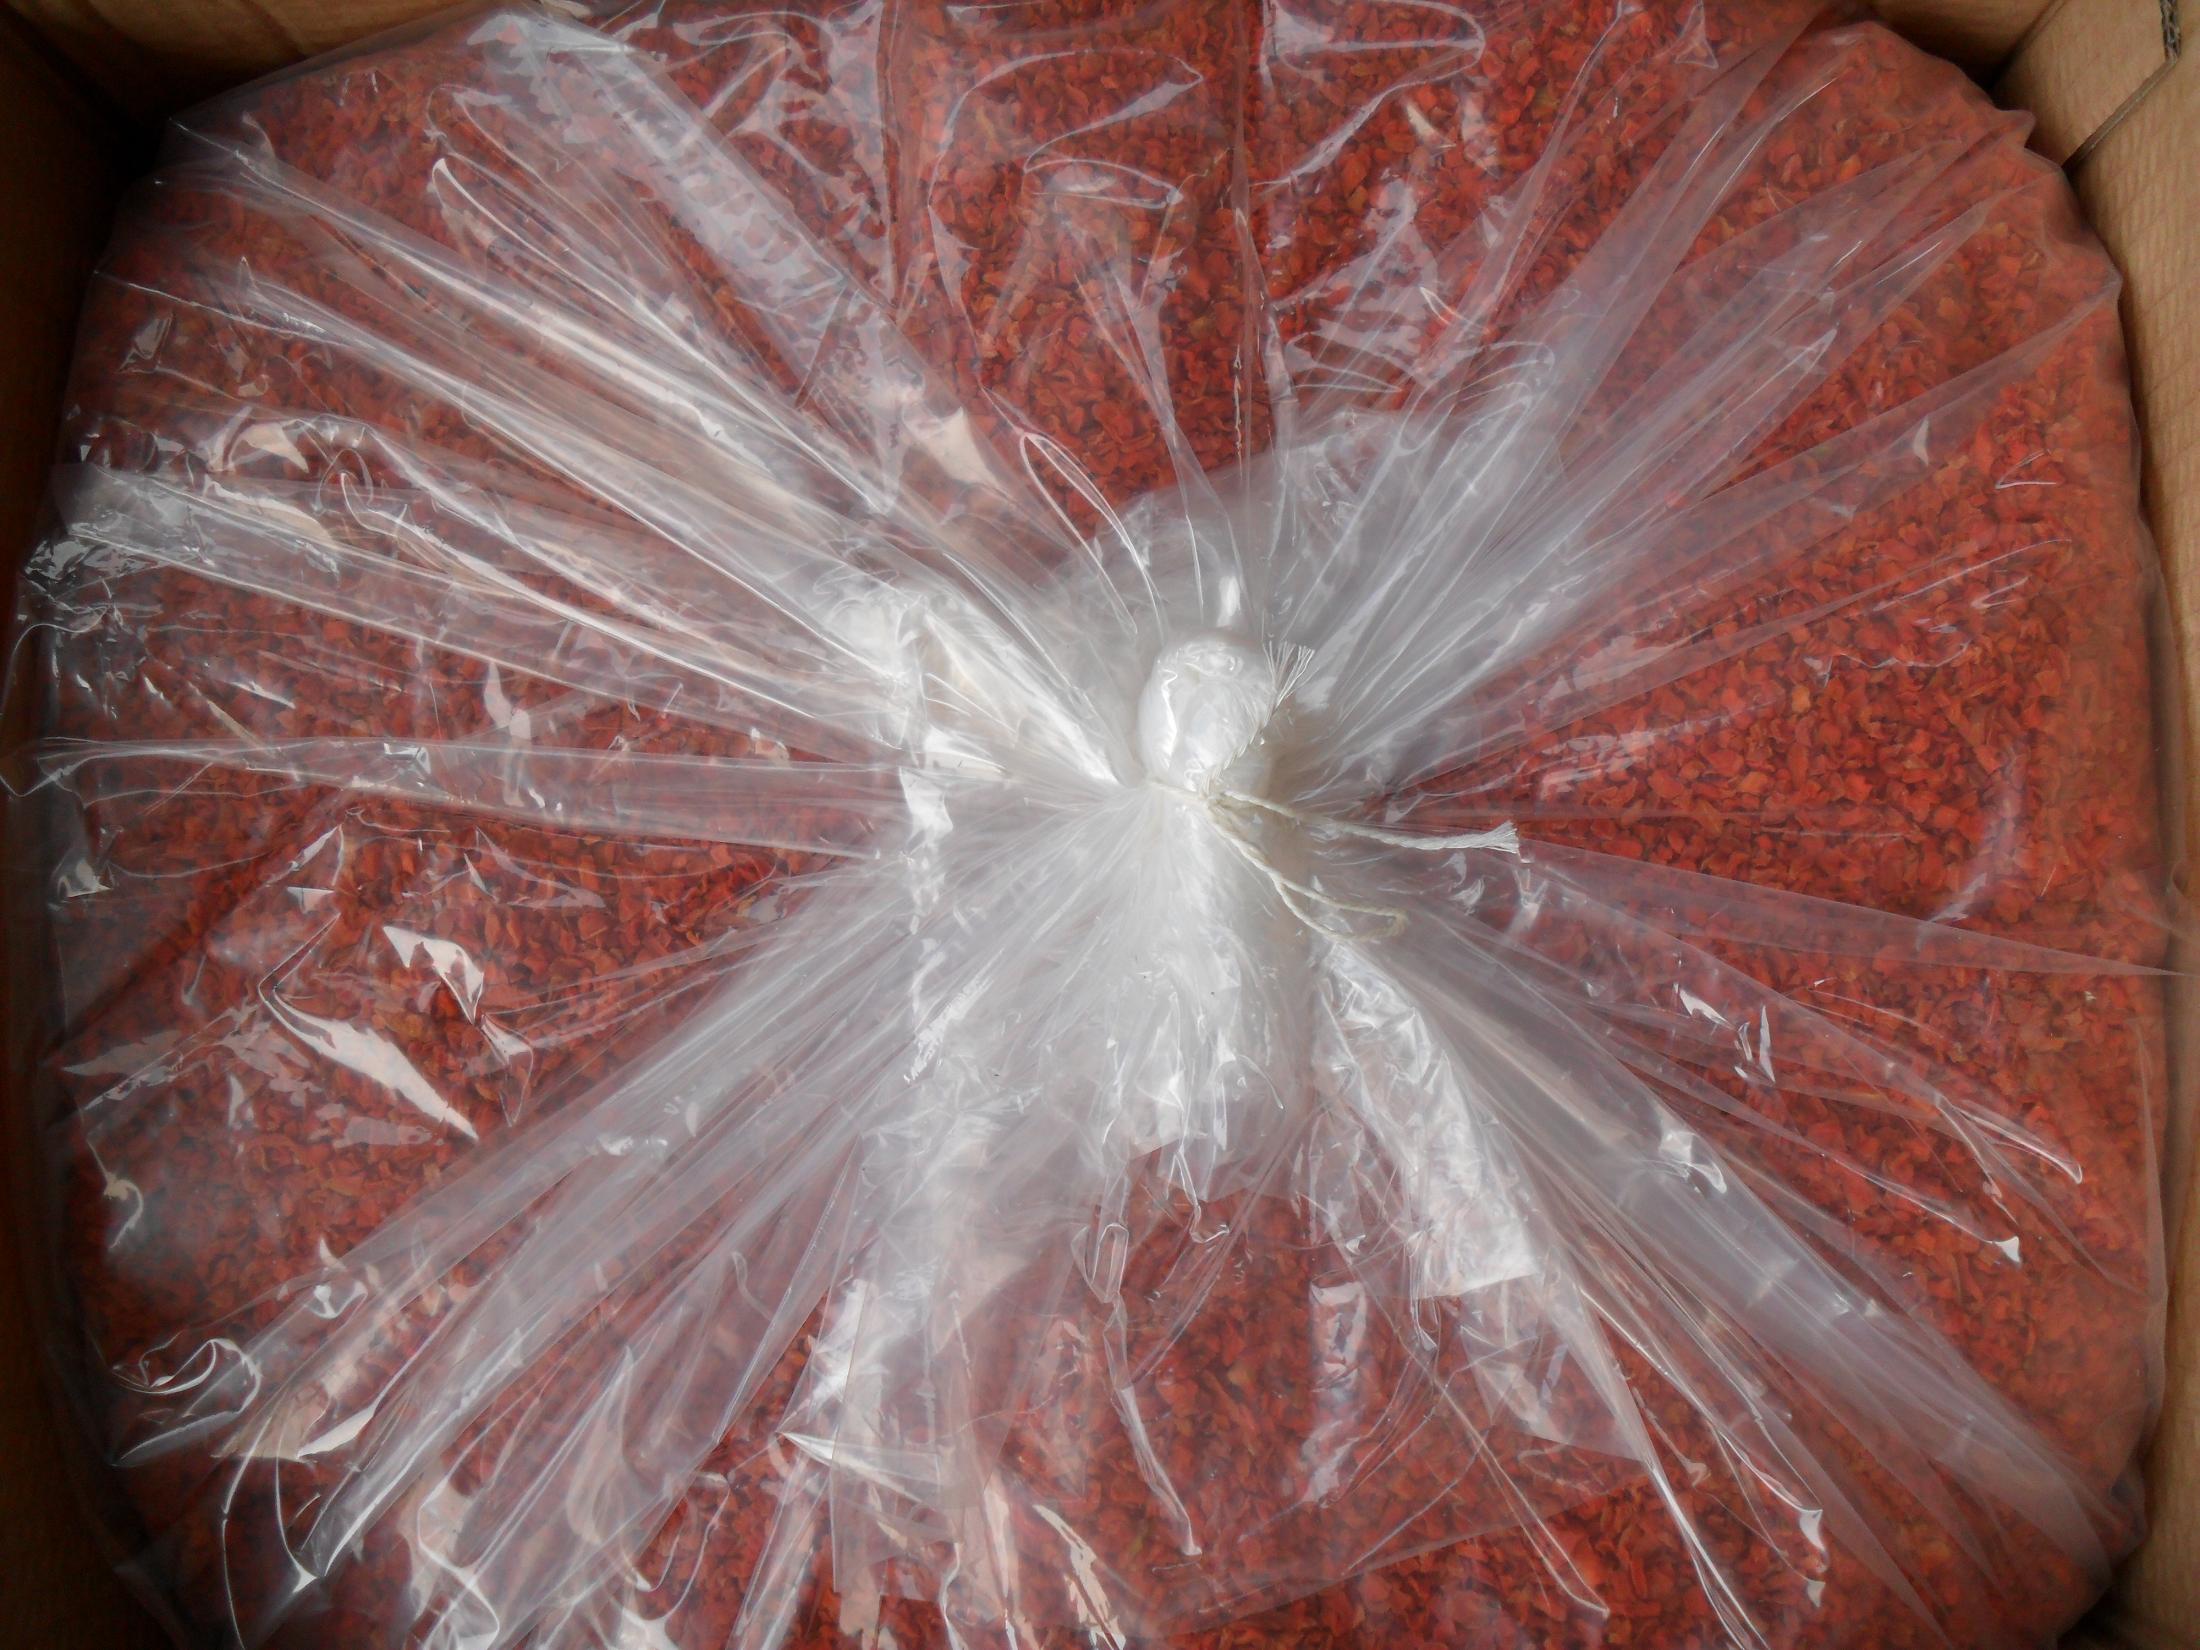 Chinese Dehydrated Carrot Granules Flakes Powder 